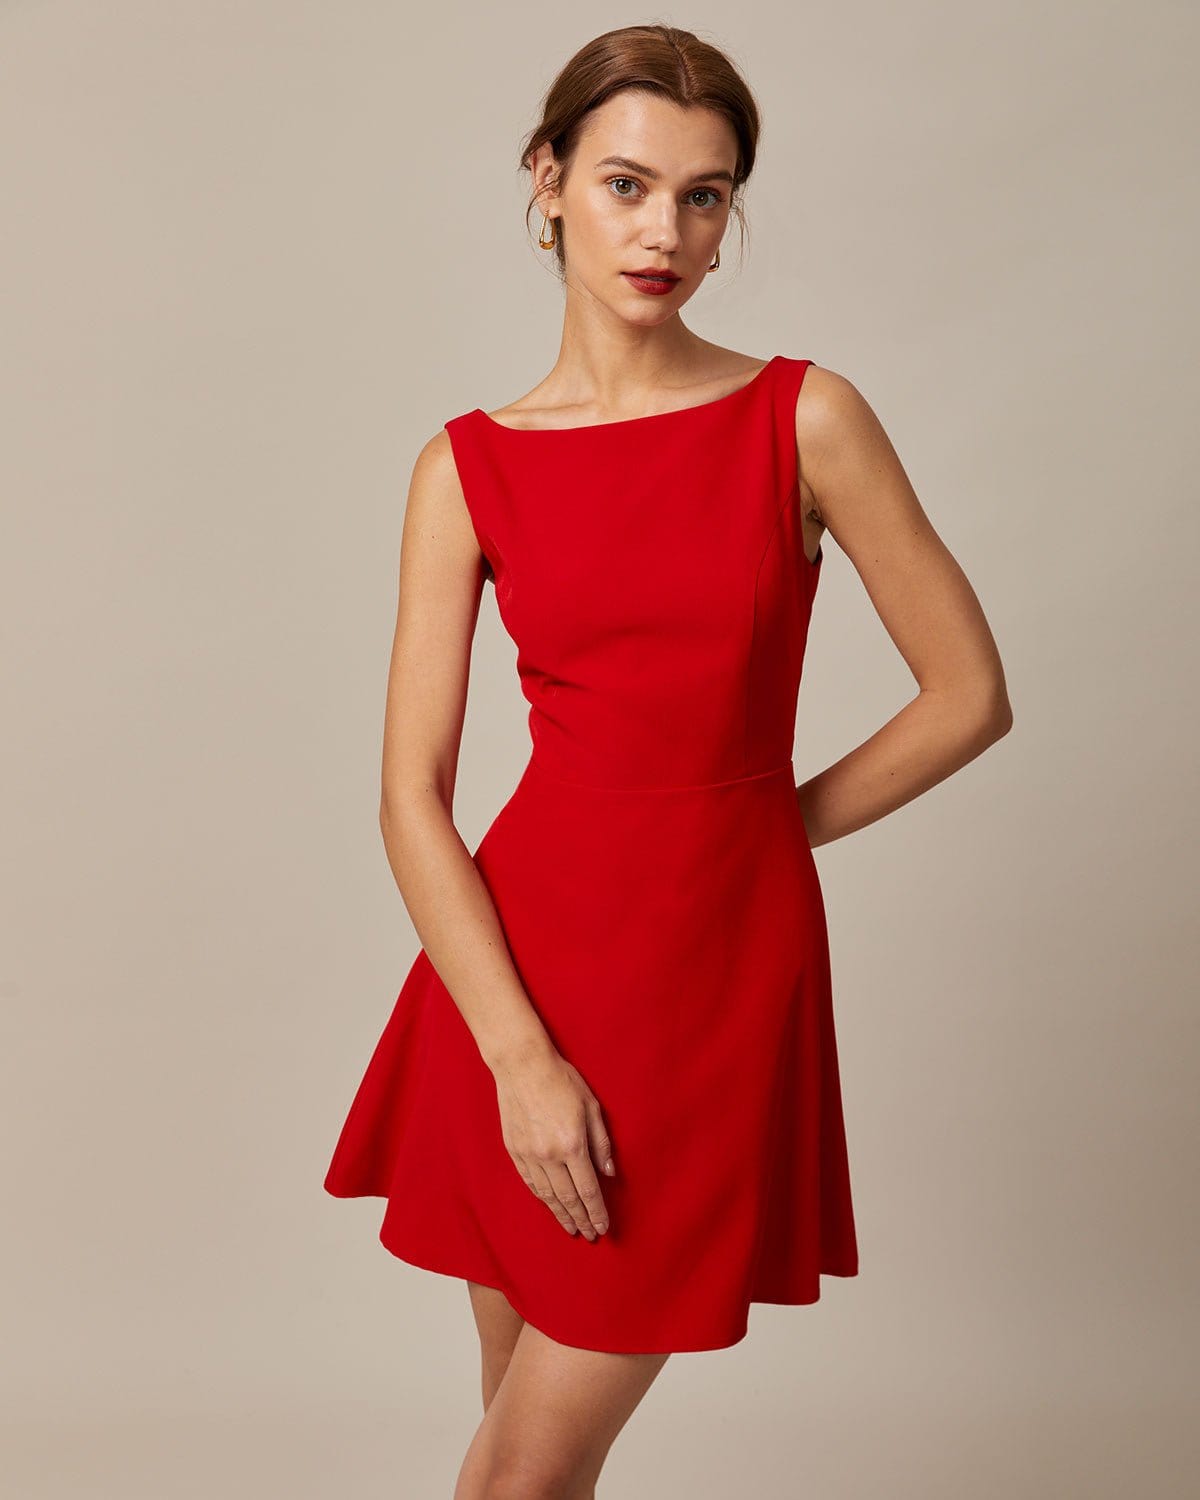 The Red Boat Neck High Waisted Mini Dress - Boat Neck Sleeveless A Line  Backless Mini Dress - Red - Dresses